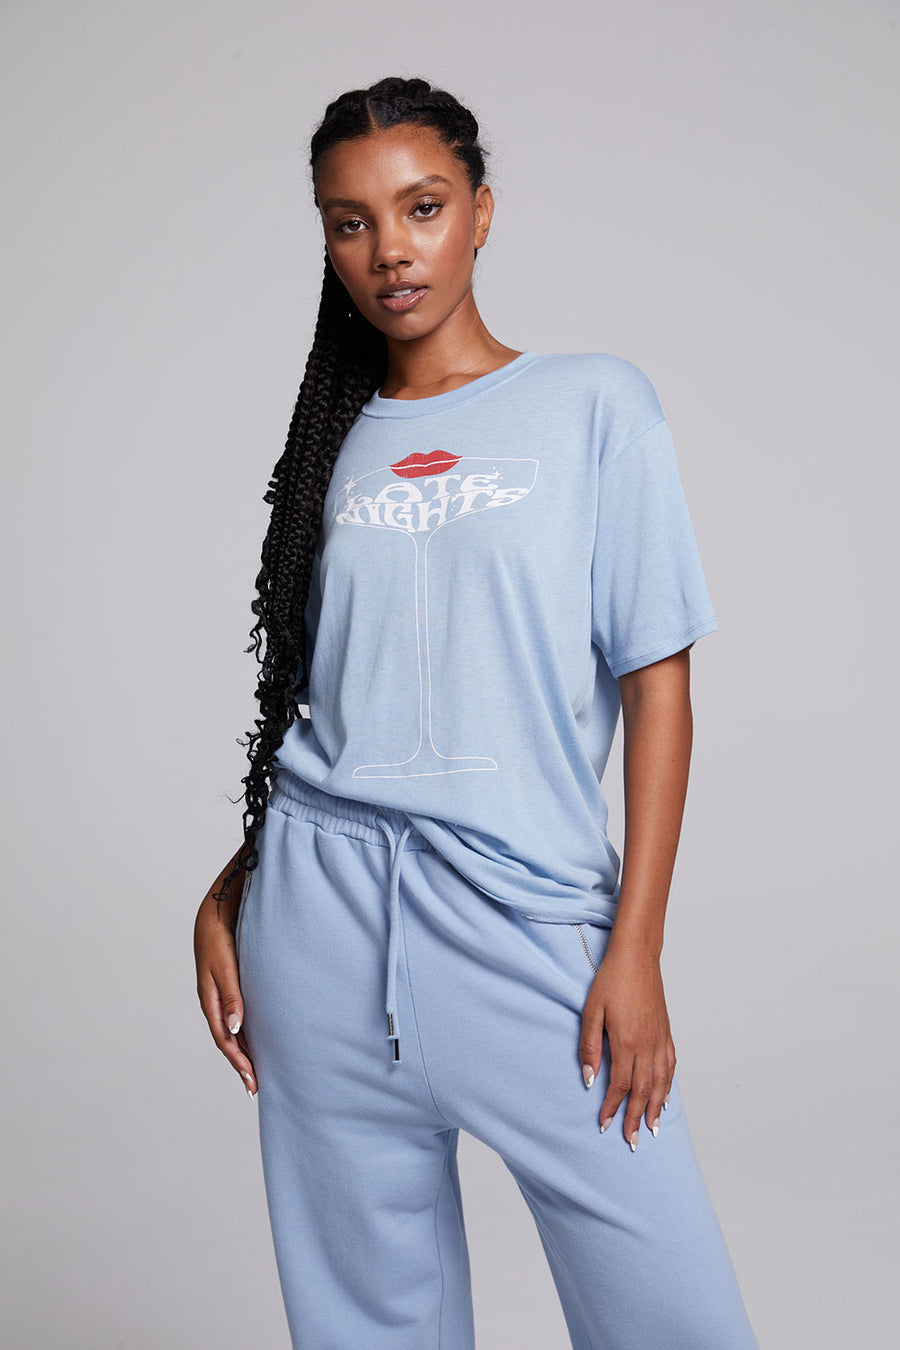 Late Night Champagne Tee WOMENS chaserbrand